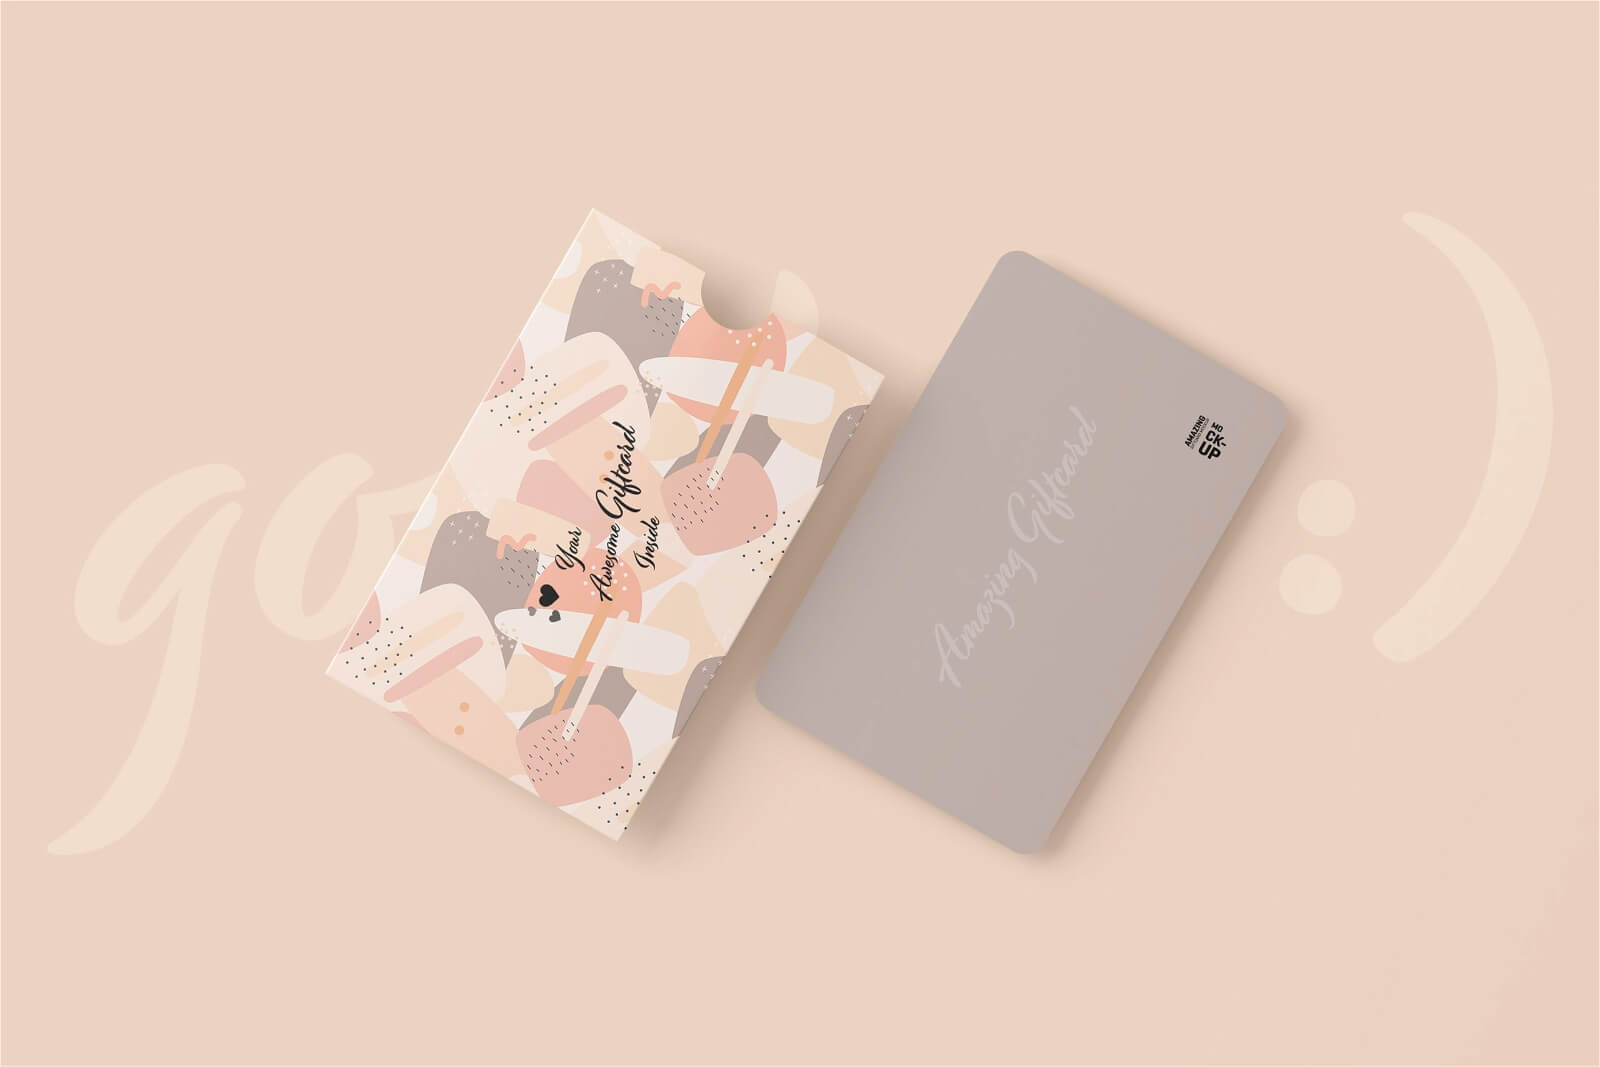 4 Free Gift Card With Holder Sleeves Mockup PSD Files